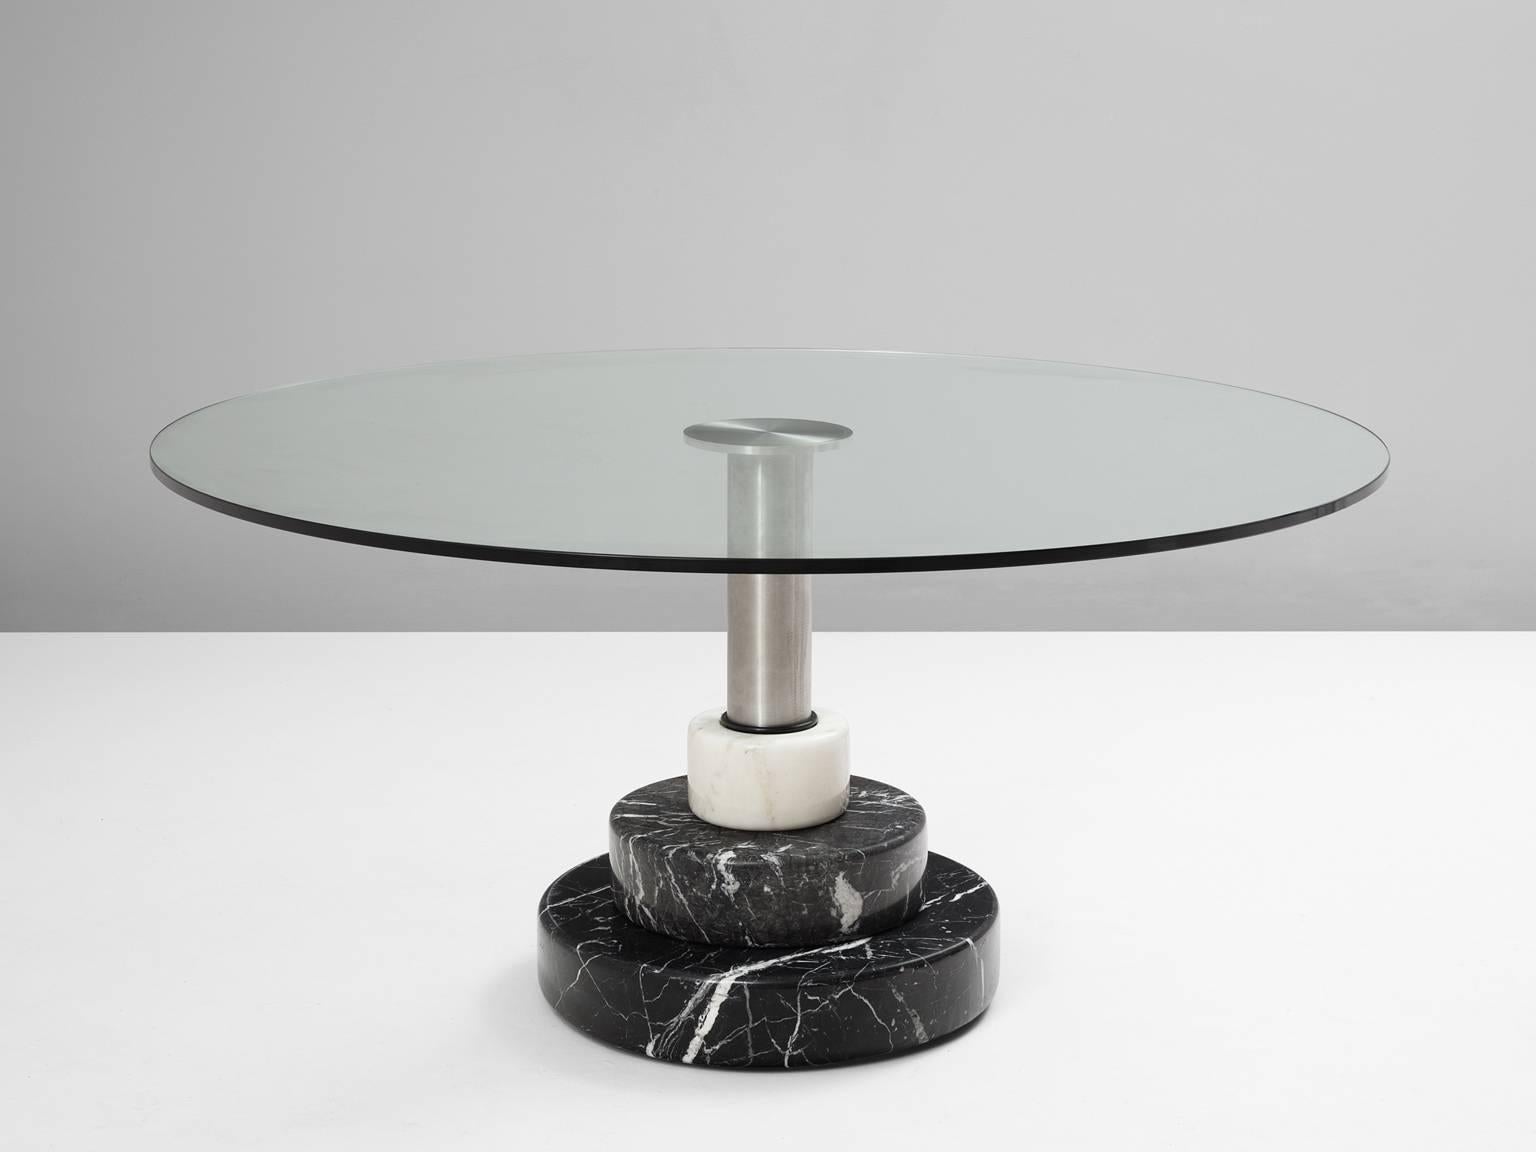 Table model 'Menhir', in marble, stainless steel and glass, by Lodovico Acerbis and Giotto Stoppino for Acerbis International, Italy, 1983.

This well designed table was part of the 